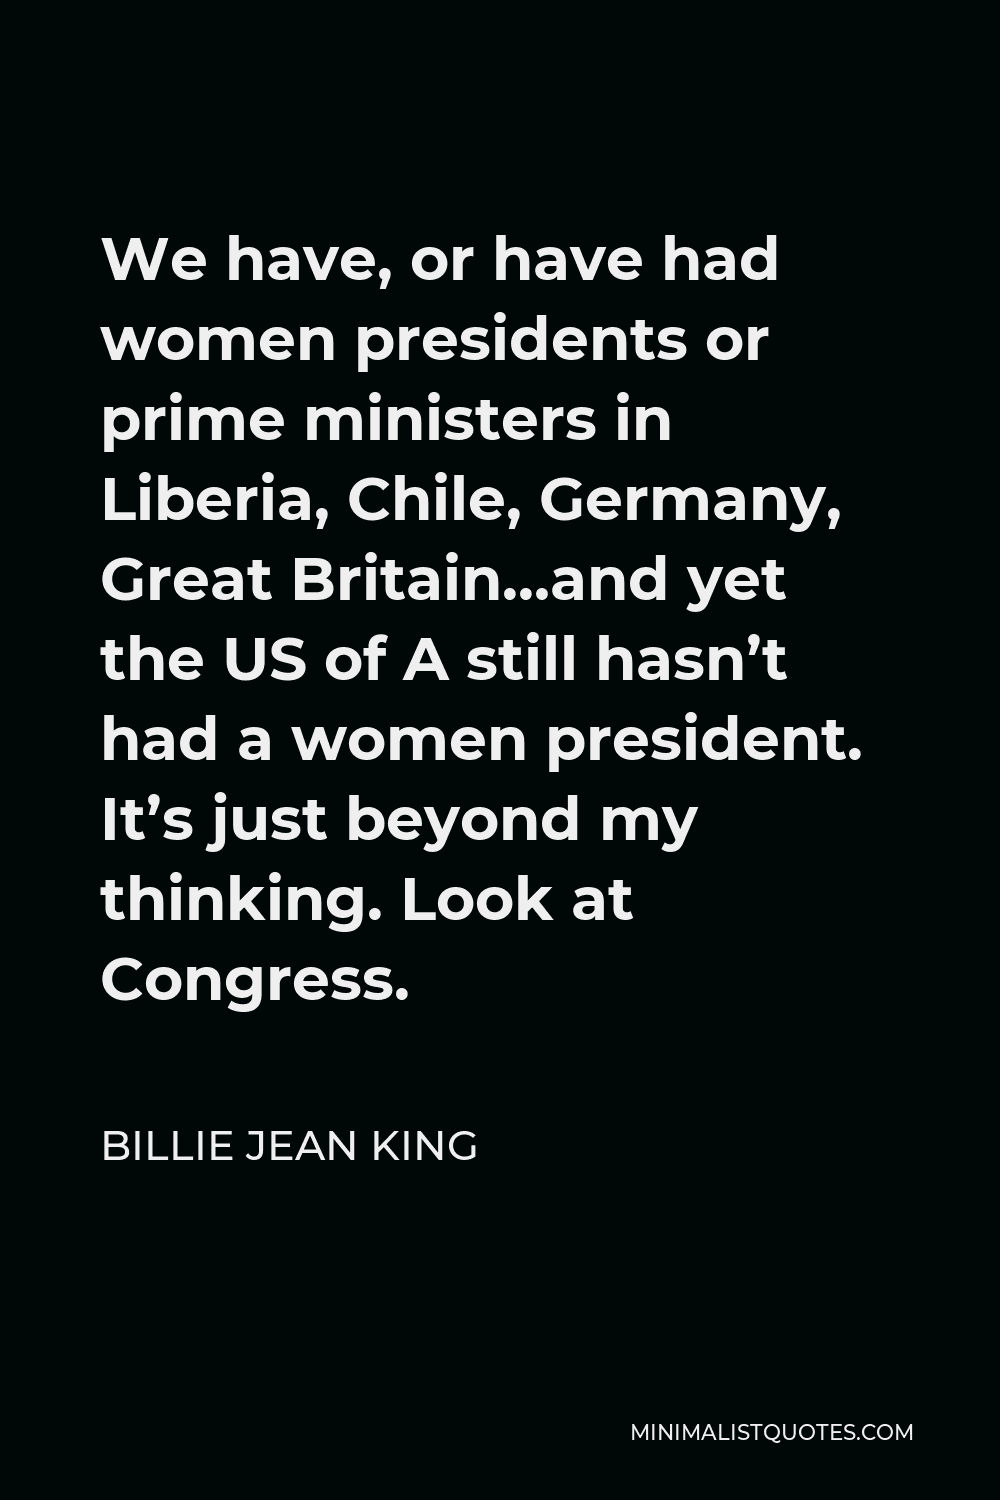 Billie Jean King Quote - We have, or have had women presidents or prime ministers in Liberia, Chile, Germany, Great Britain…and yet the US of A still hasn’t had a women president. It’s just beyond my thinking. Look at Congress.